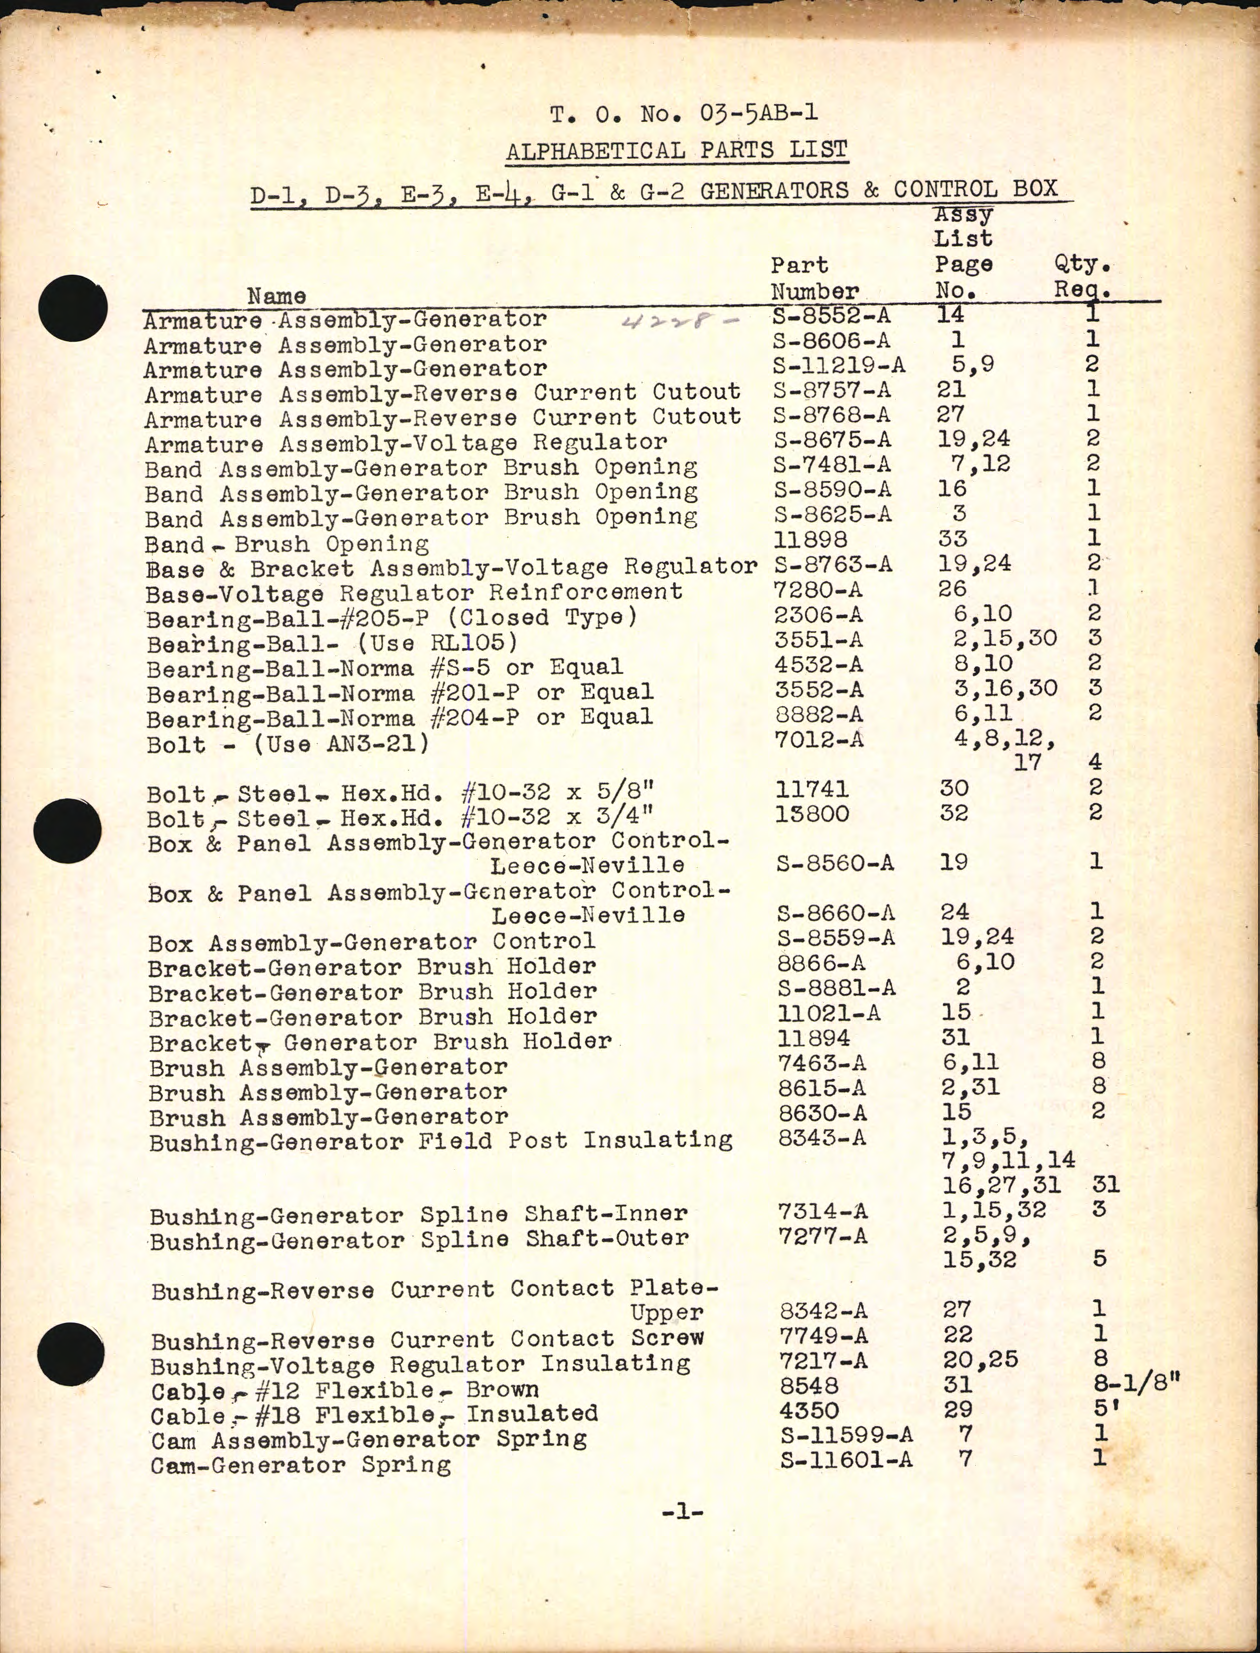 Sample page 1 from AirCorps Library document: Alphabetical Parts List for D-1, D-3, E-3, G-1, and G-2 Generators and Control Box